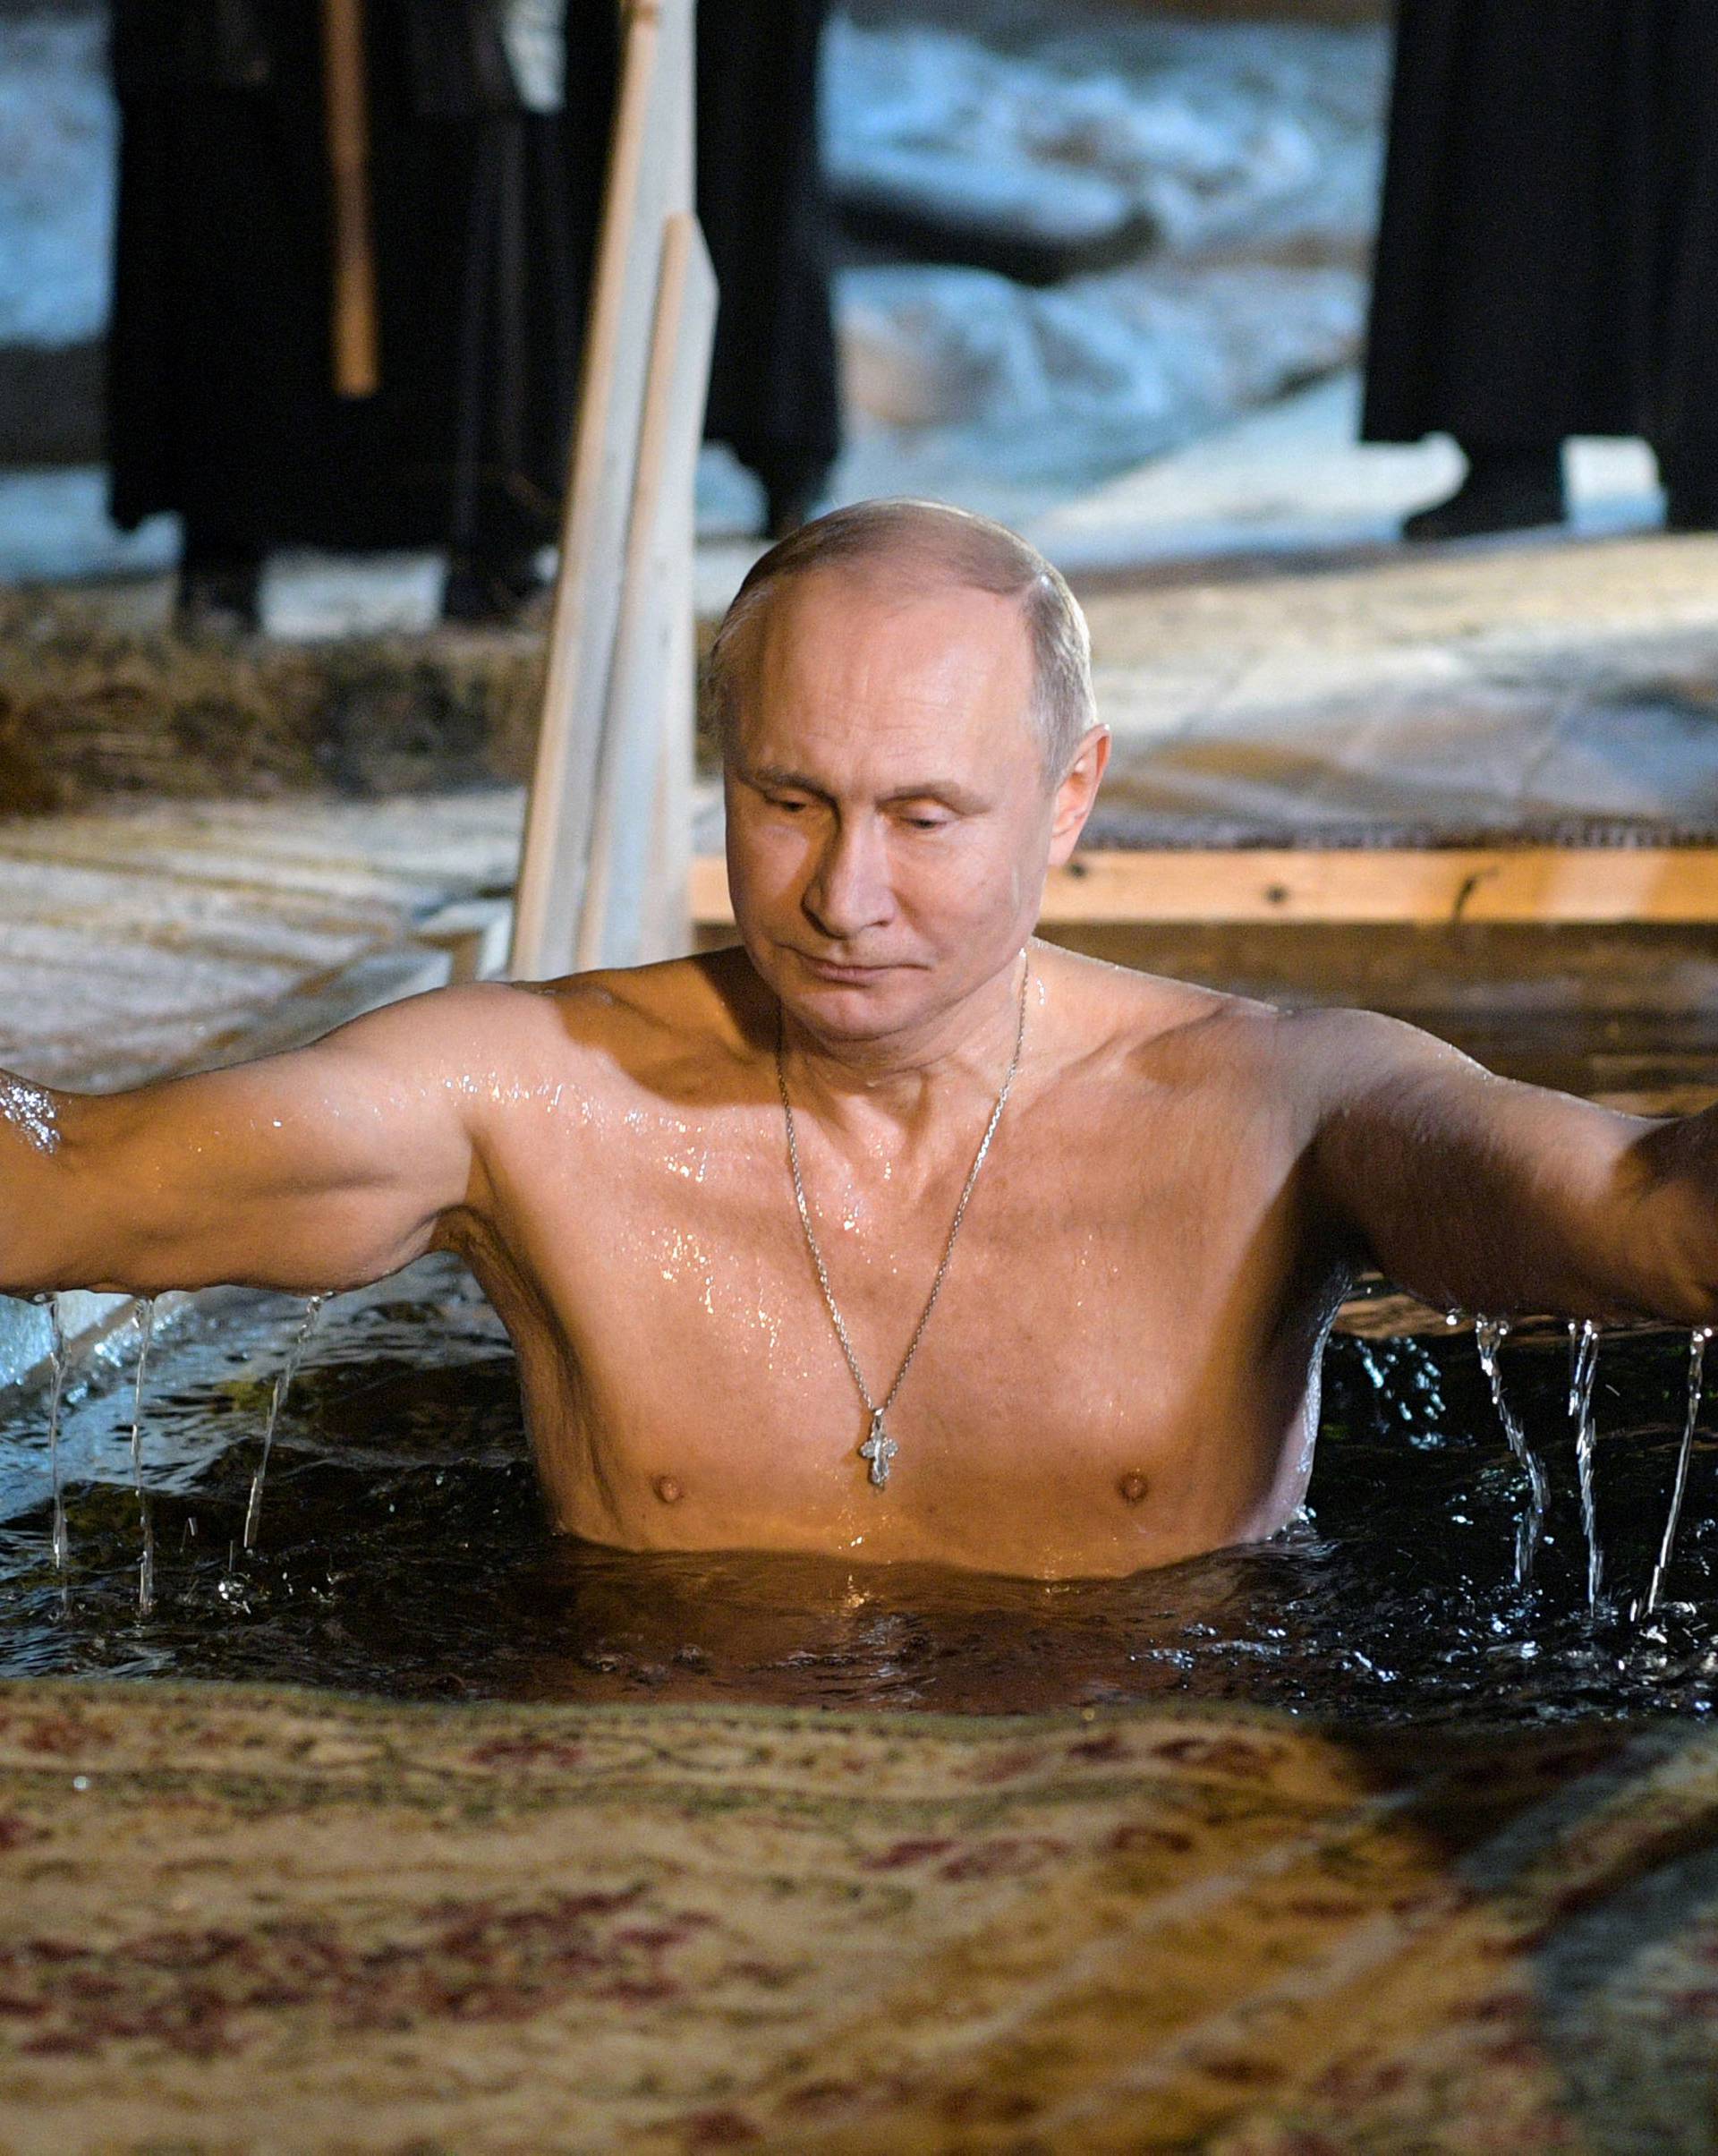 Russian President Vladimir Putin takes a dip in the water during Orthodox Epiphany celebrations at lake Seliger, Tver region